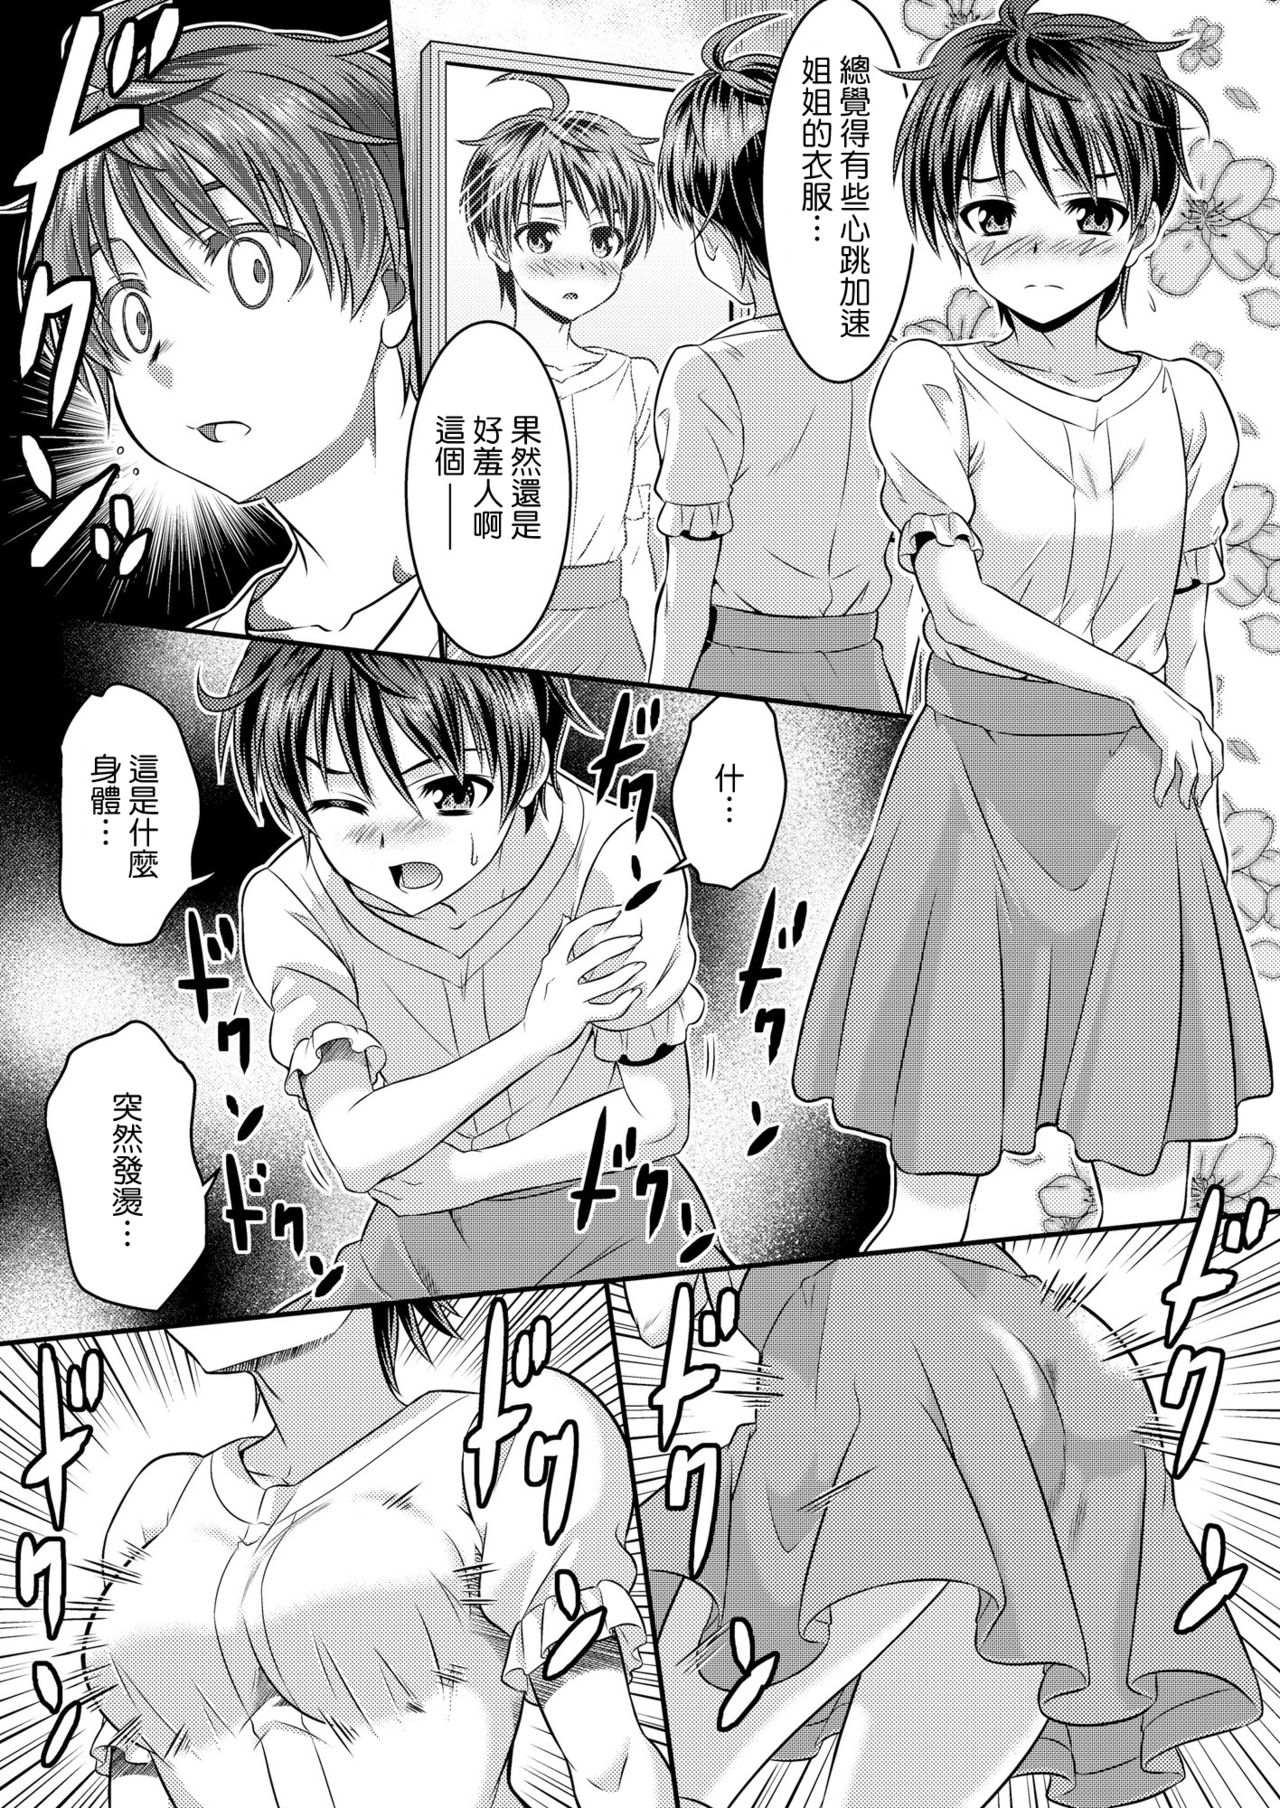 Metamorph ★ Coordination - I Become Whatever Girl I Crossdress As~ [Sister Arc, Classmate Arc] [Chinese] [瑞树汉化组] page 6 full